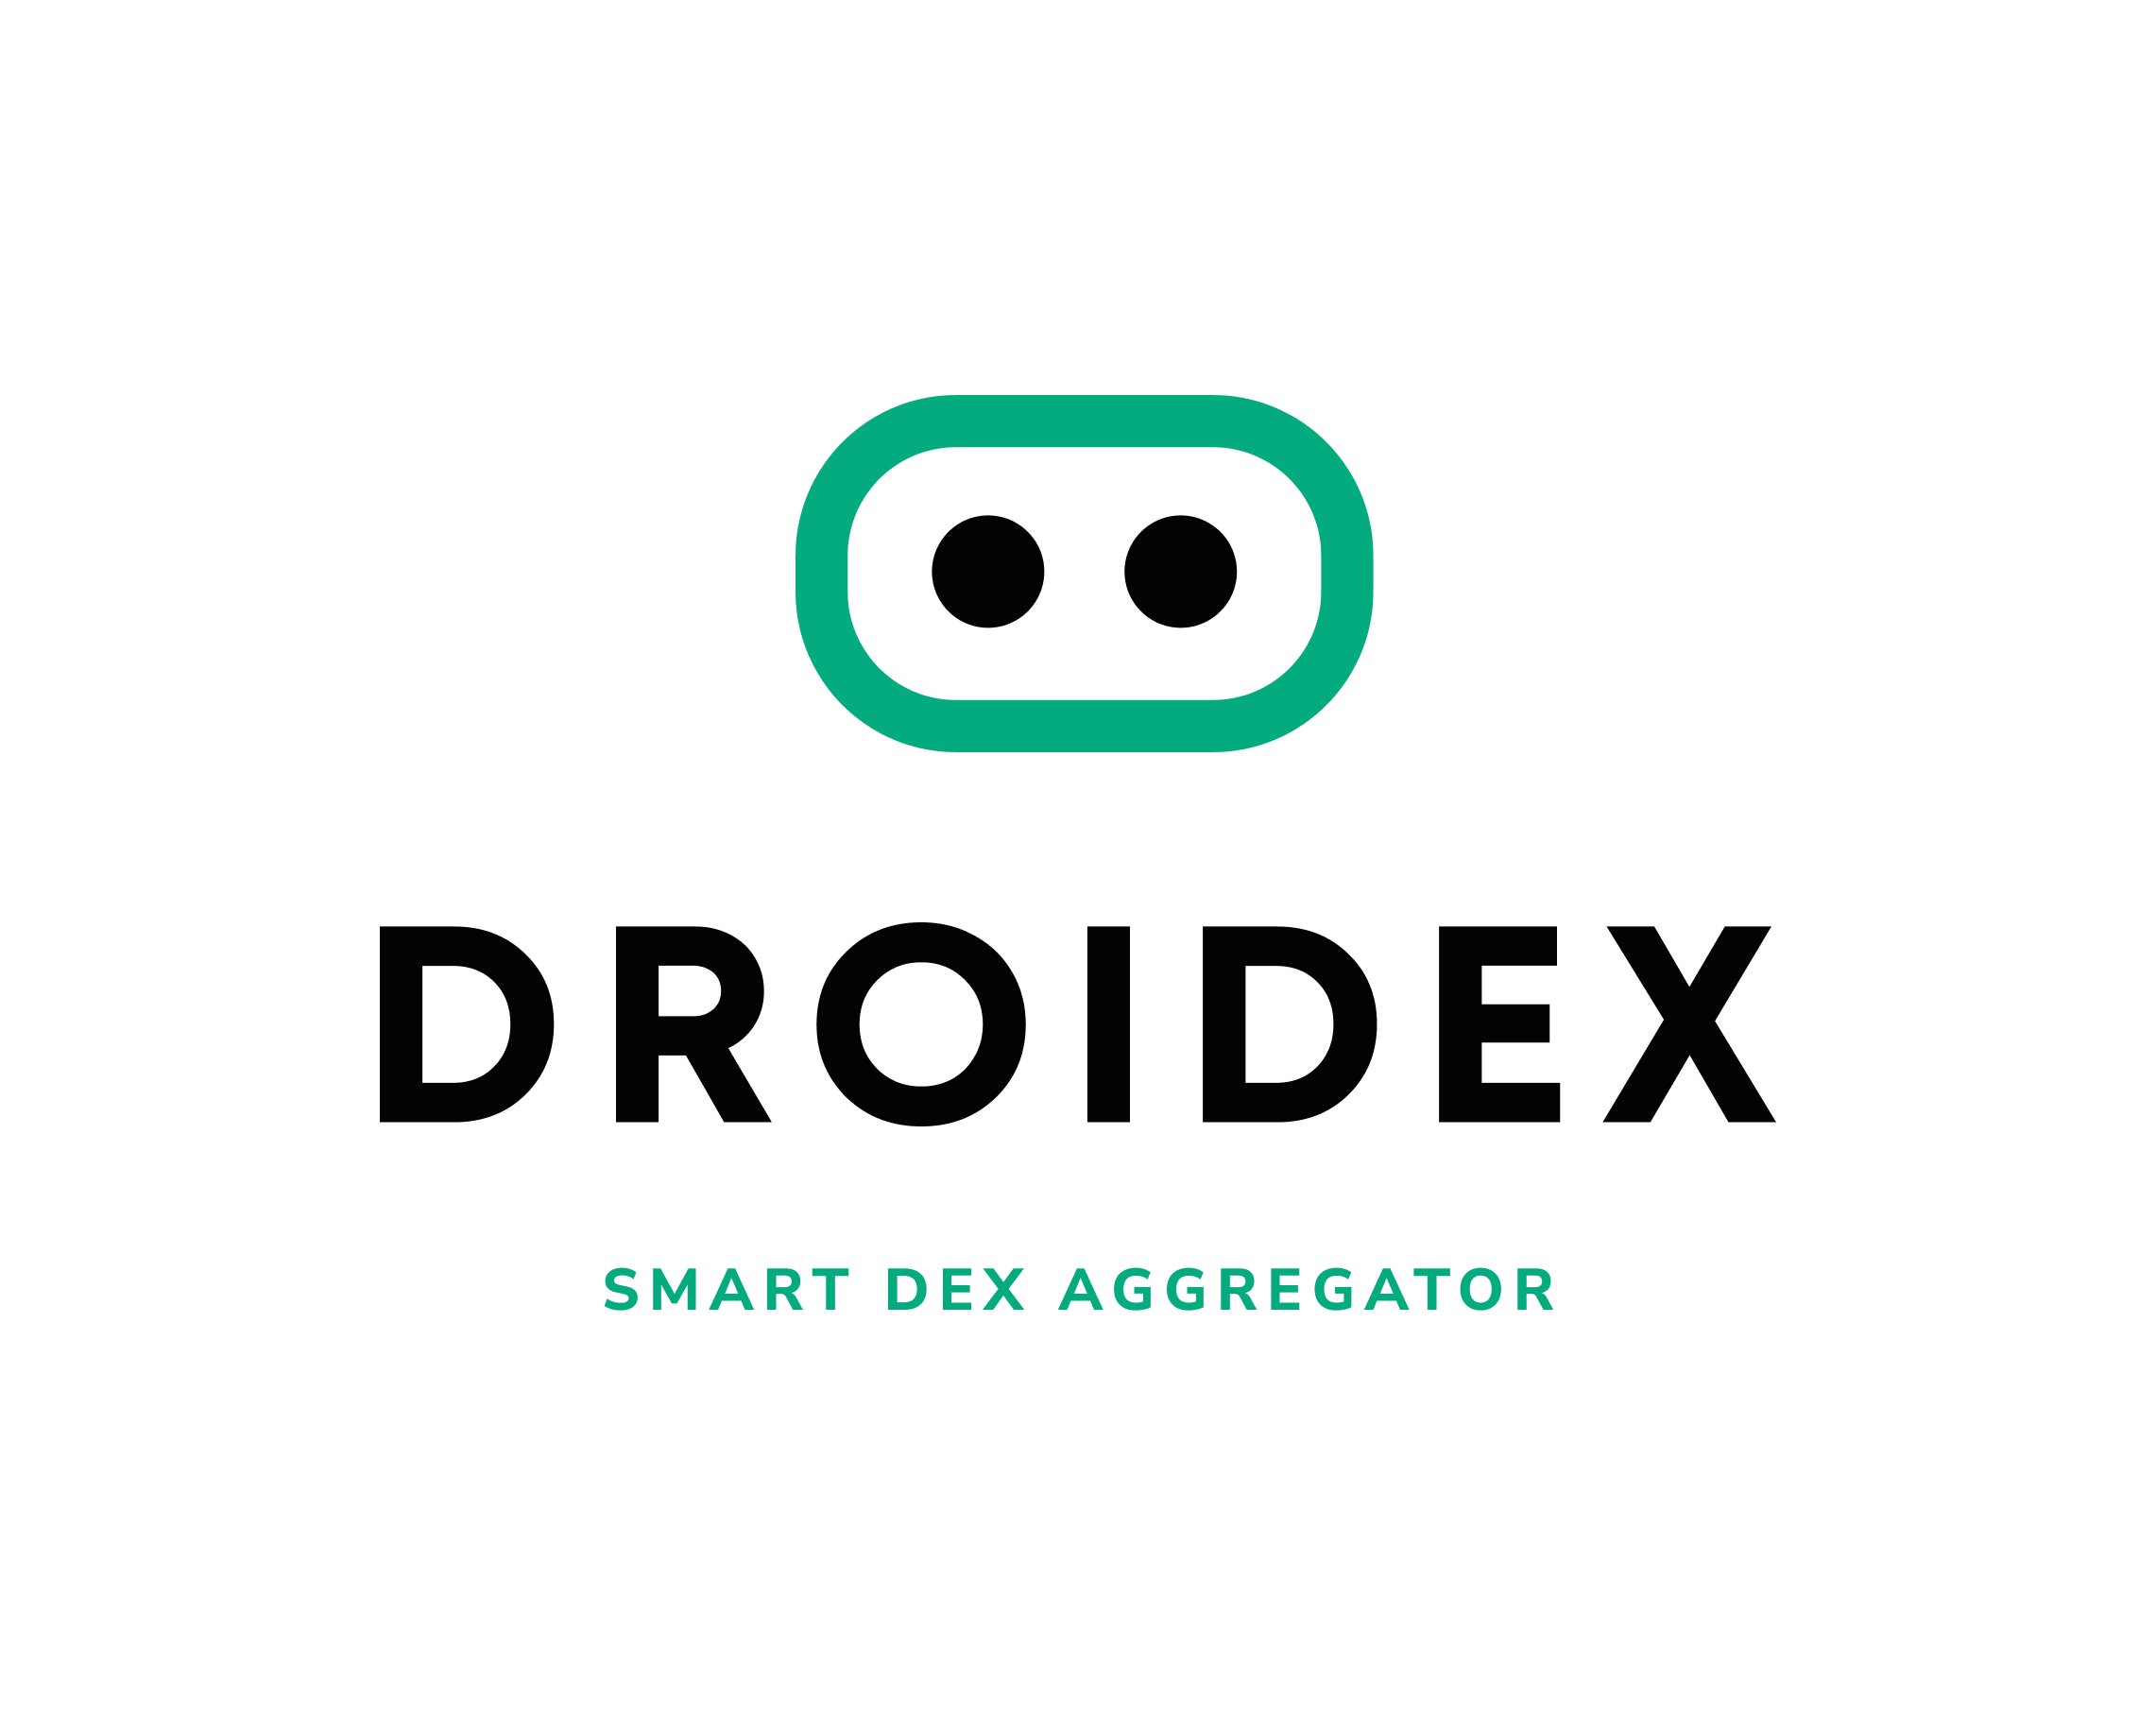 Droidex - DEX aggregator on Ethereum, BSC, Polygon and Avalanche.